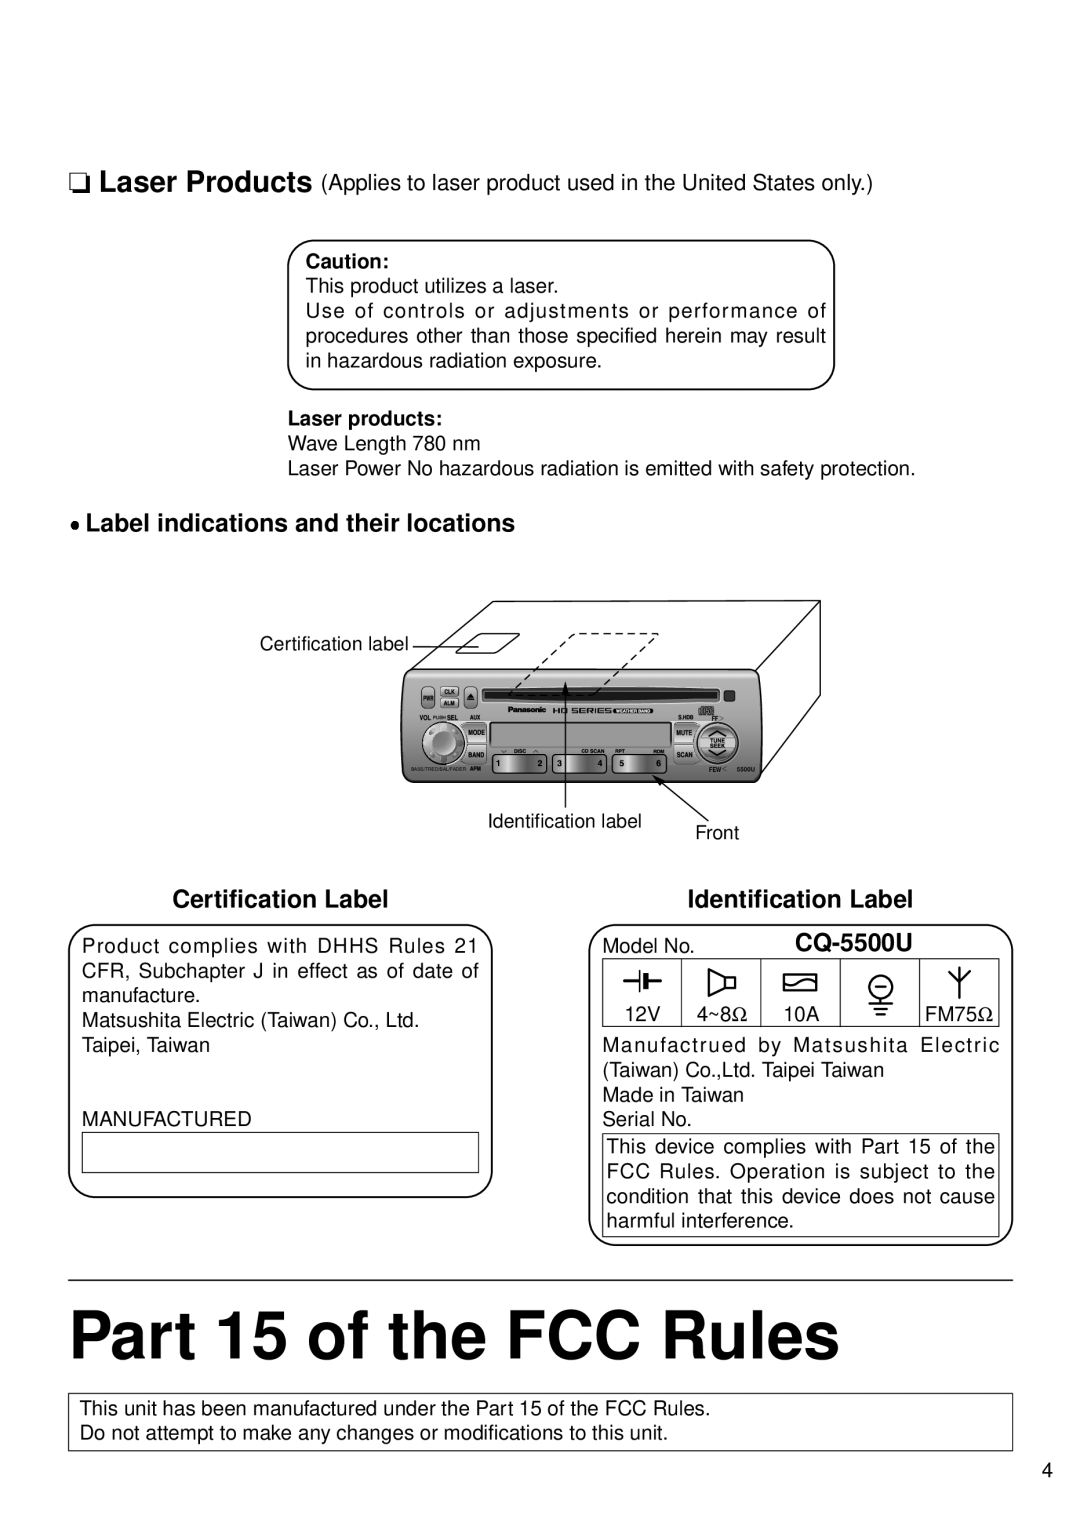 Panasonic 5300U Part 15 of the FCC Rules, Label indications and their locations, Certification Label, Identification Label 